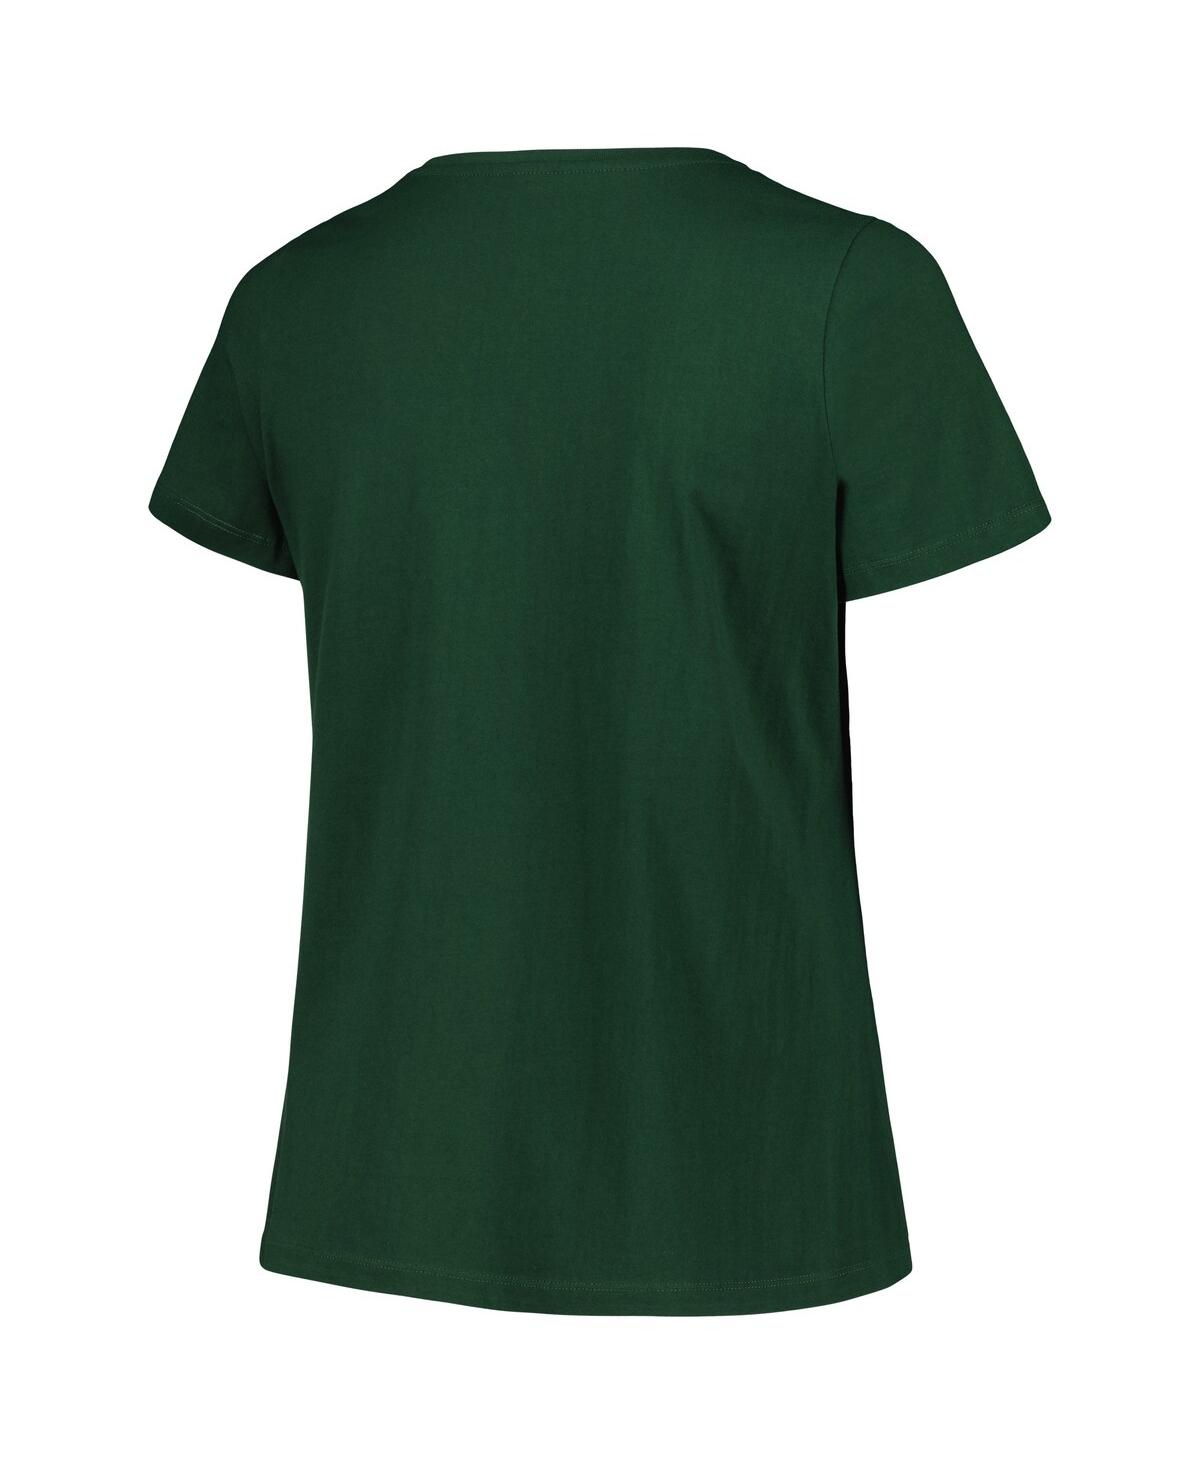 Shop Profile Women's Green Michigan State Spartans Plus Size Arch Over Logo Scoop Neck T-shirt